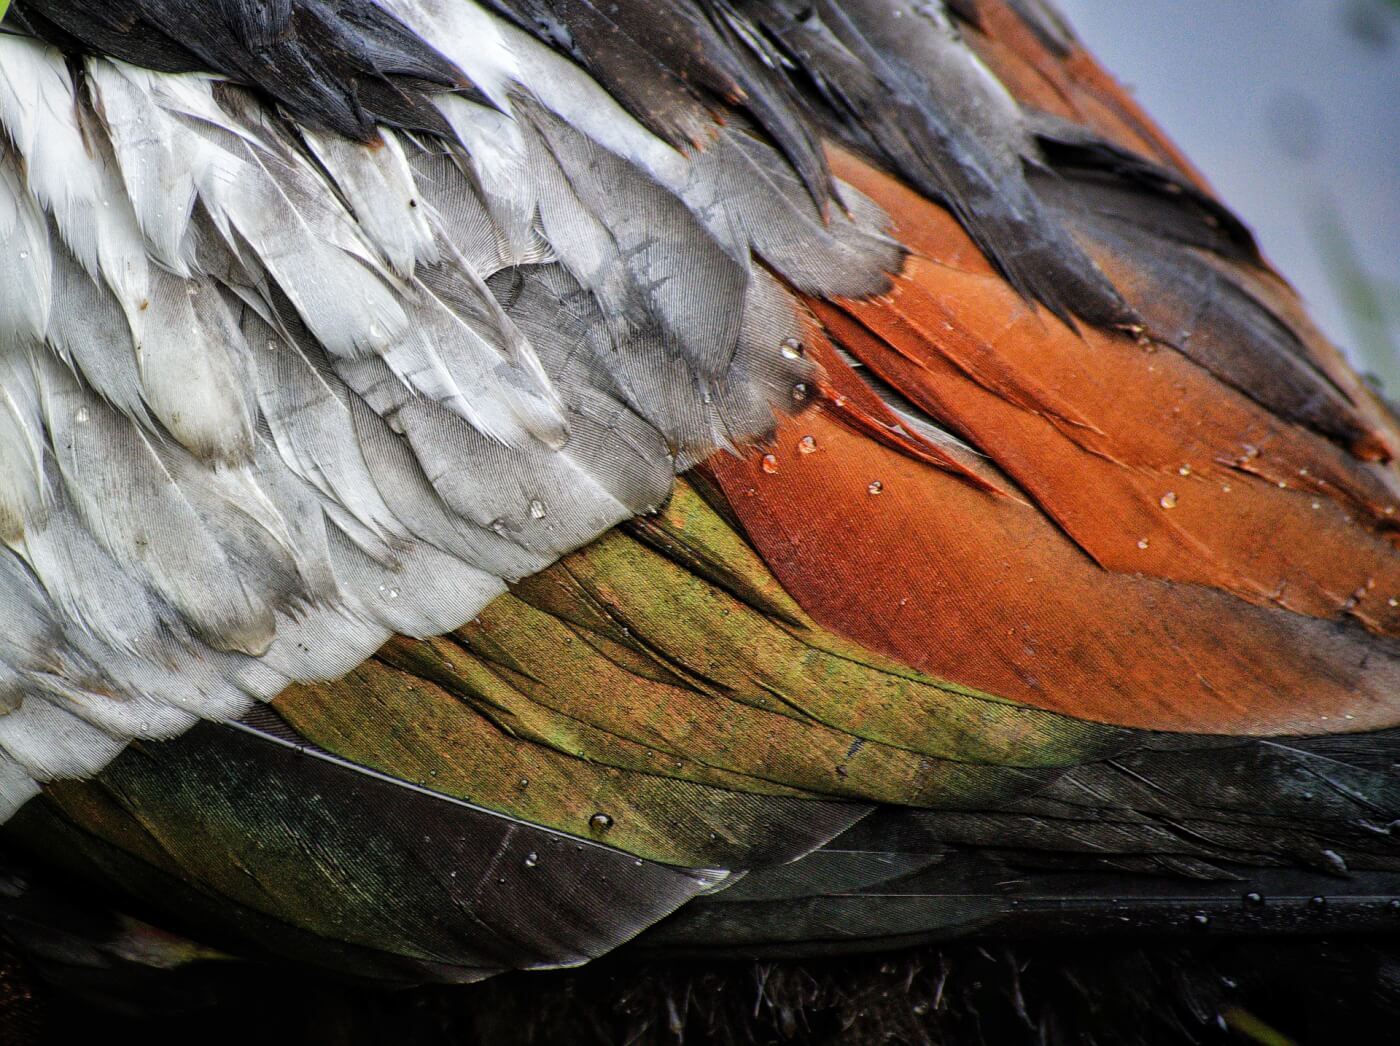 close up of a duck's feathers waterproof